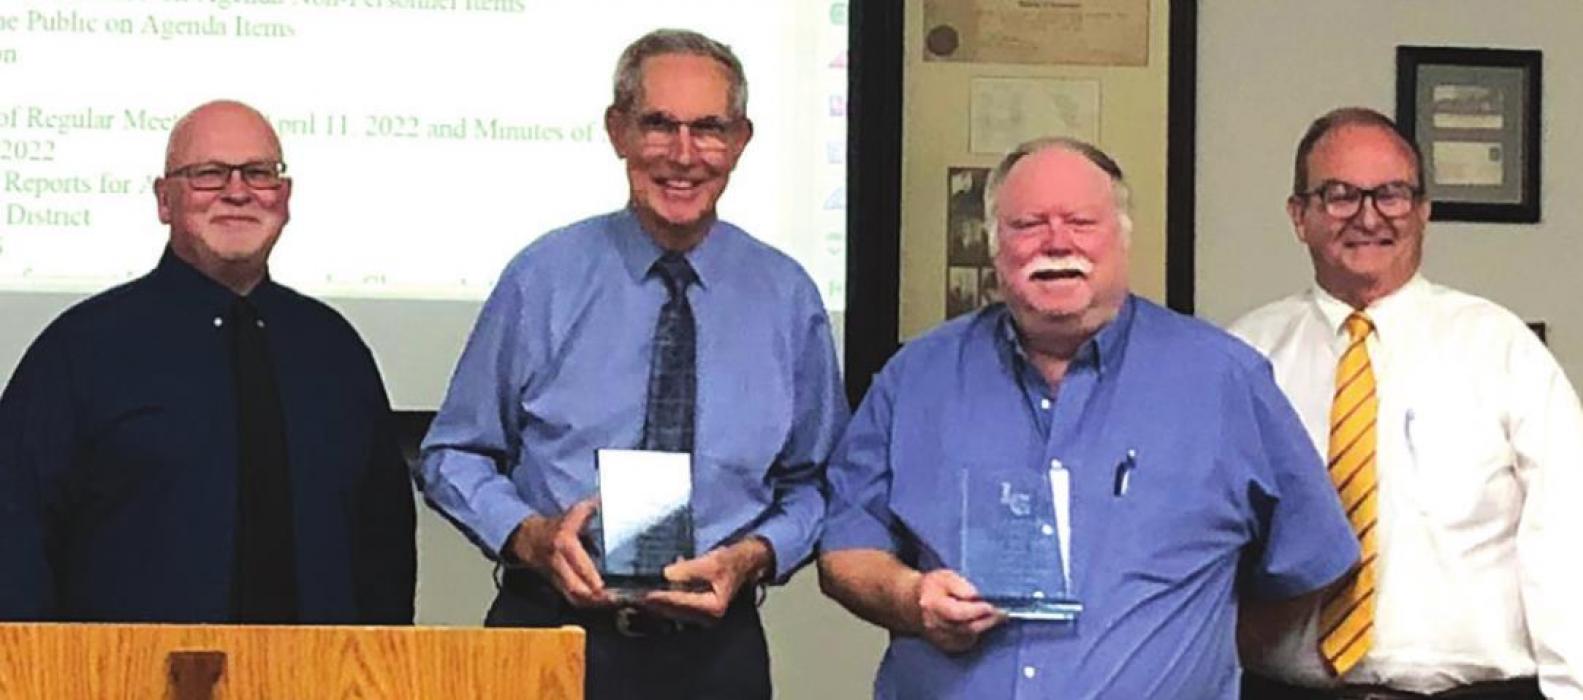 LGISD School Board president Gary Drab, left, and superintendent William Wager, right, present outgoing board members Dr. L. Donald Mayer and Greg Trlicek with awards of appreciation for their combined 48 years of service to the district.